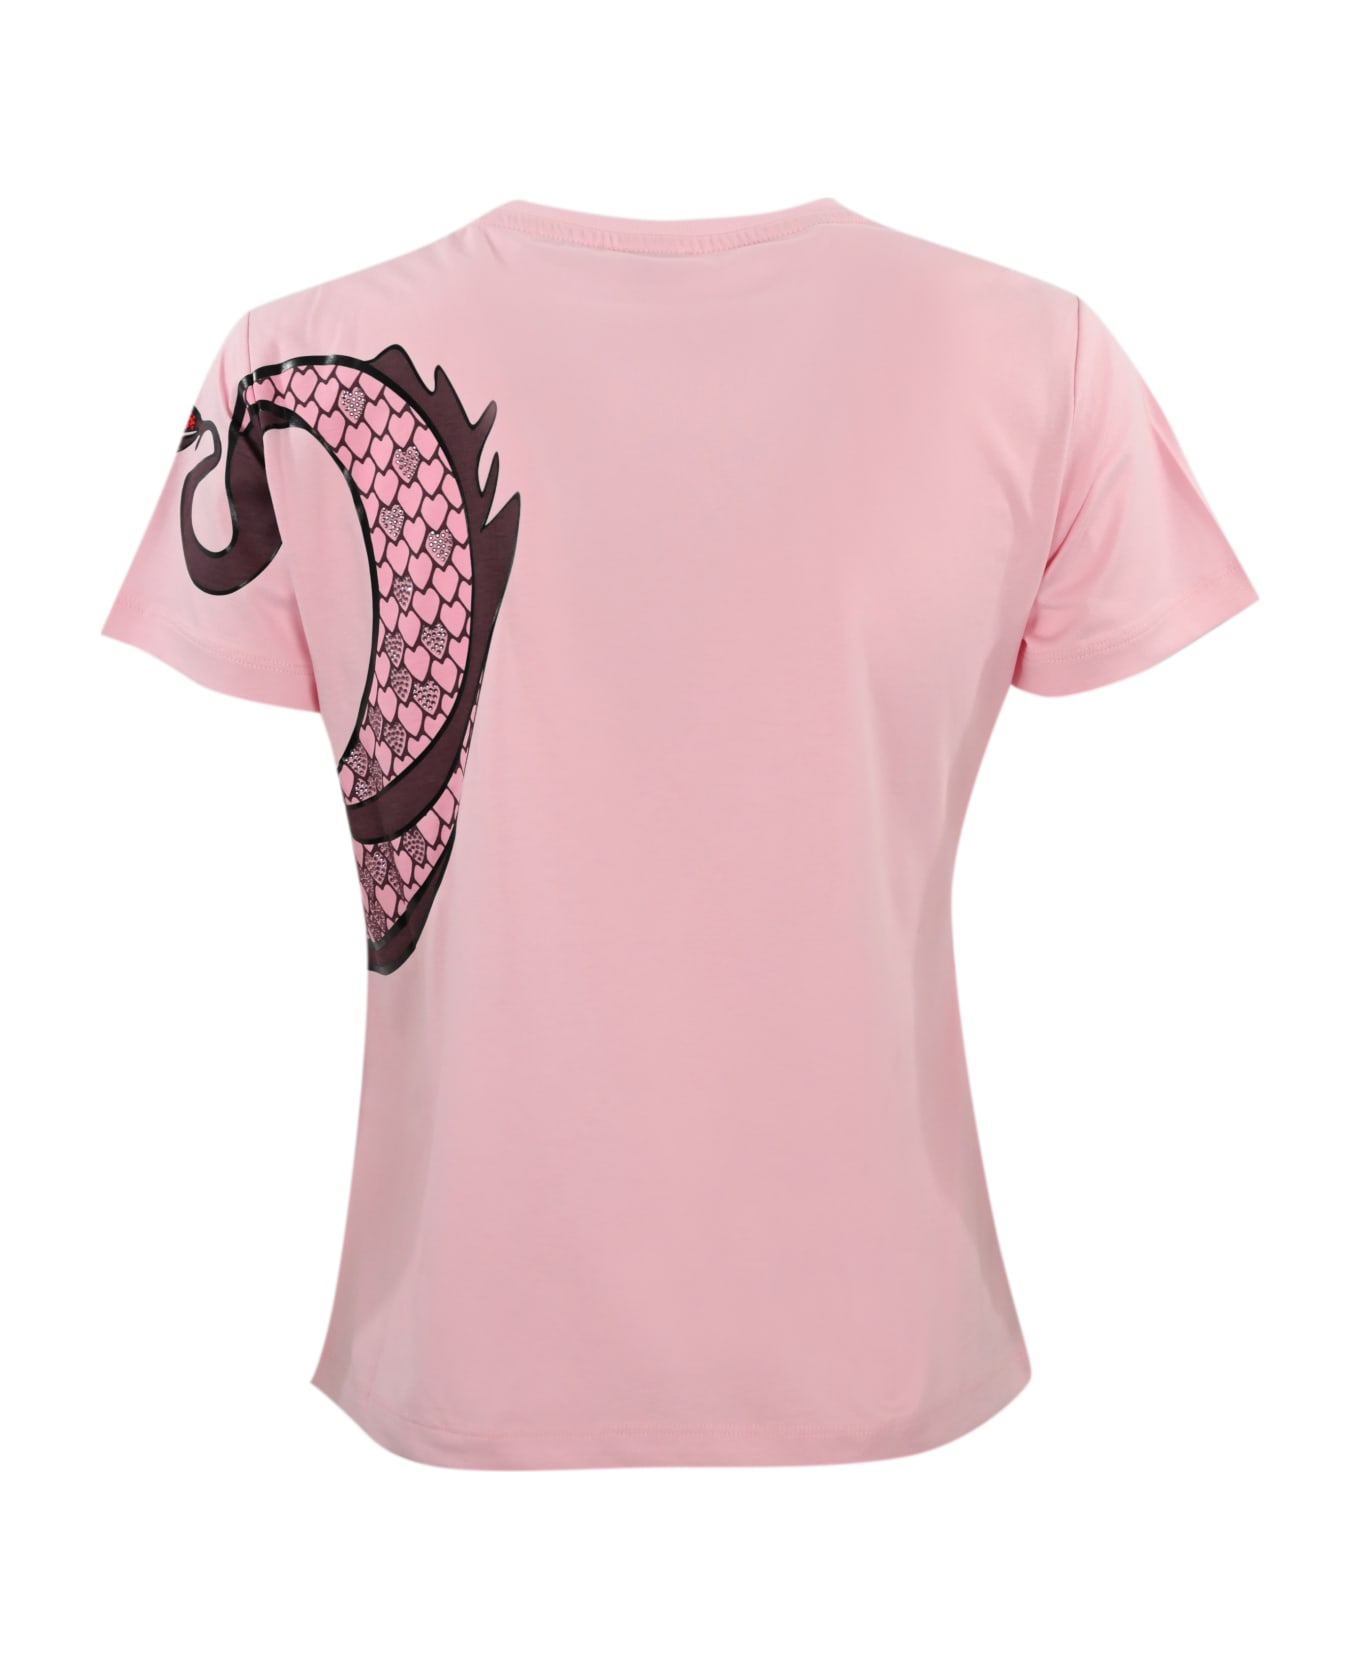 Pinko Quentin T-shirt With Glitter Design - Pink